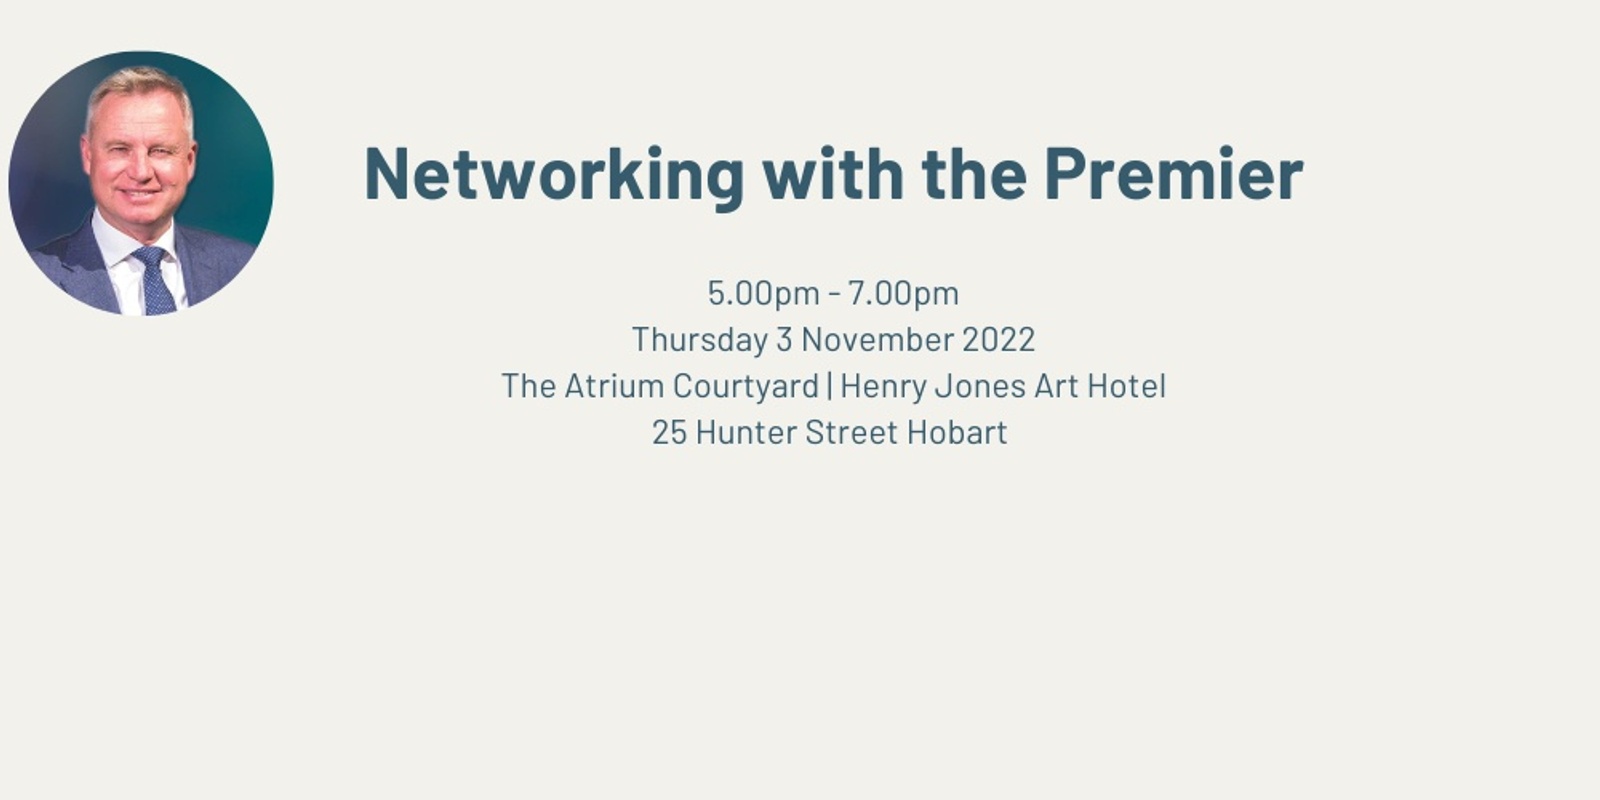 Banner image for Networking with the Premier